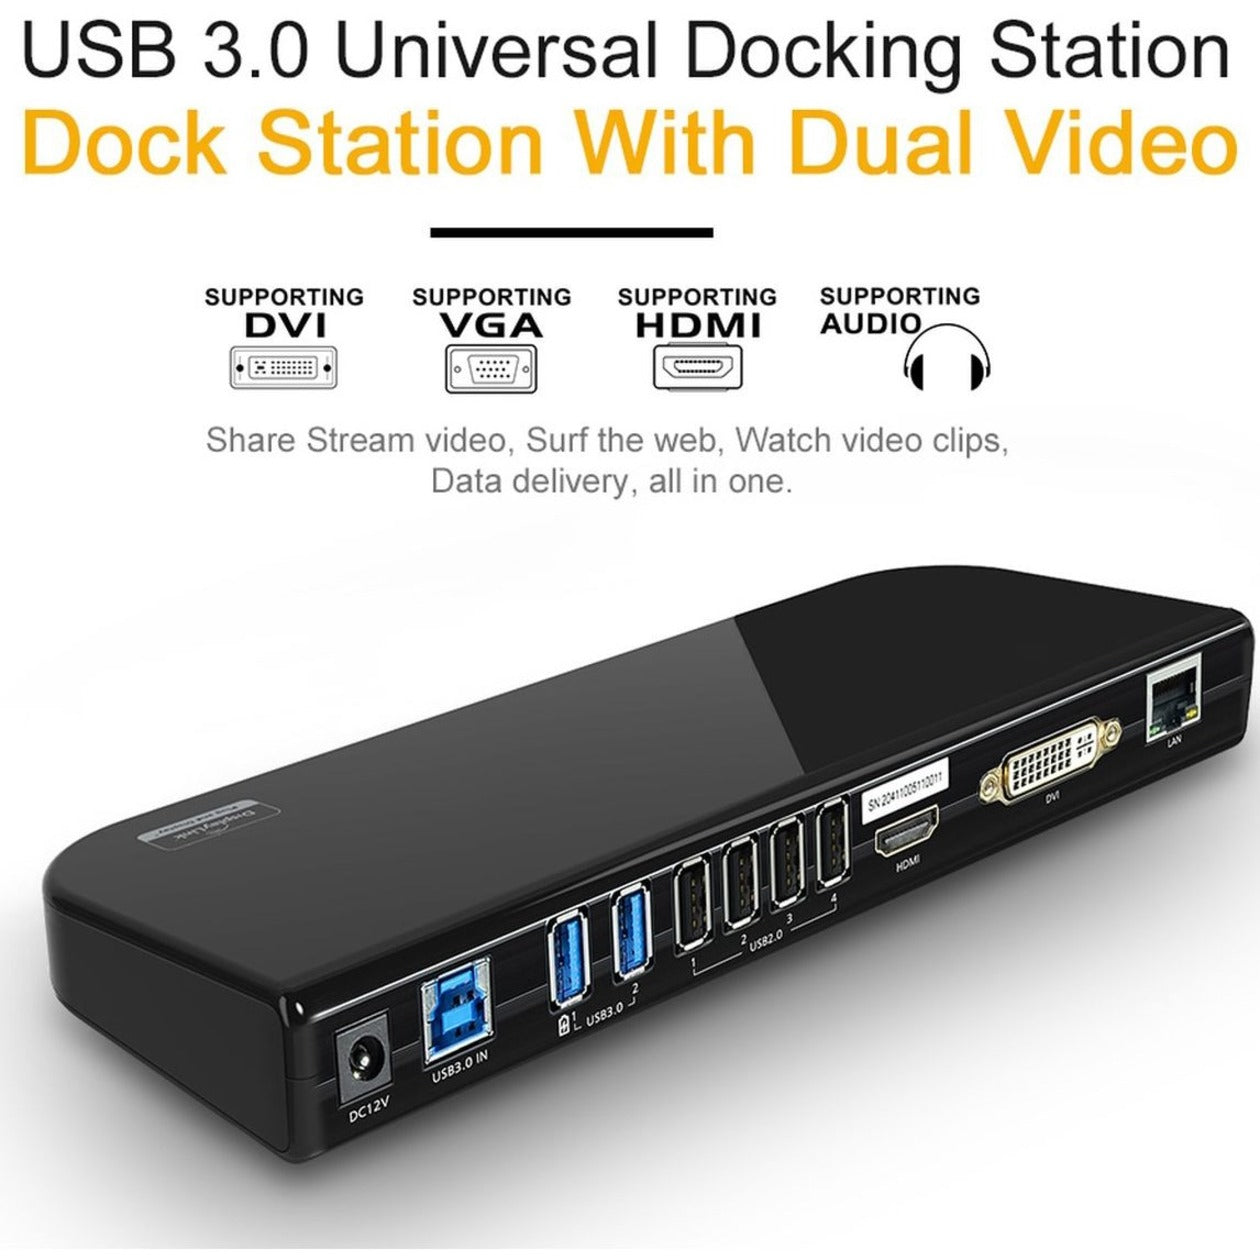 4XEM 4XUG39DK1 USB 3.0 Universal Docking Station with Dual Monitor Capabilities, HDMI, DVI, USB 3.0 Ports, RJ-45, Audio In/Out